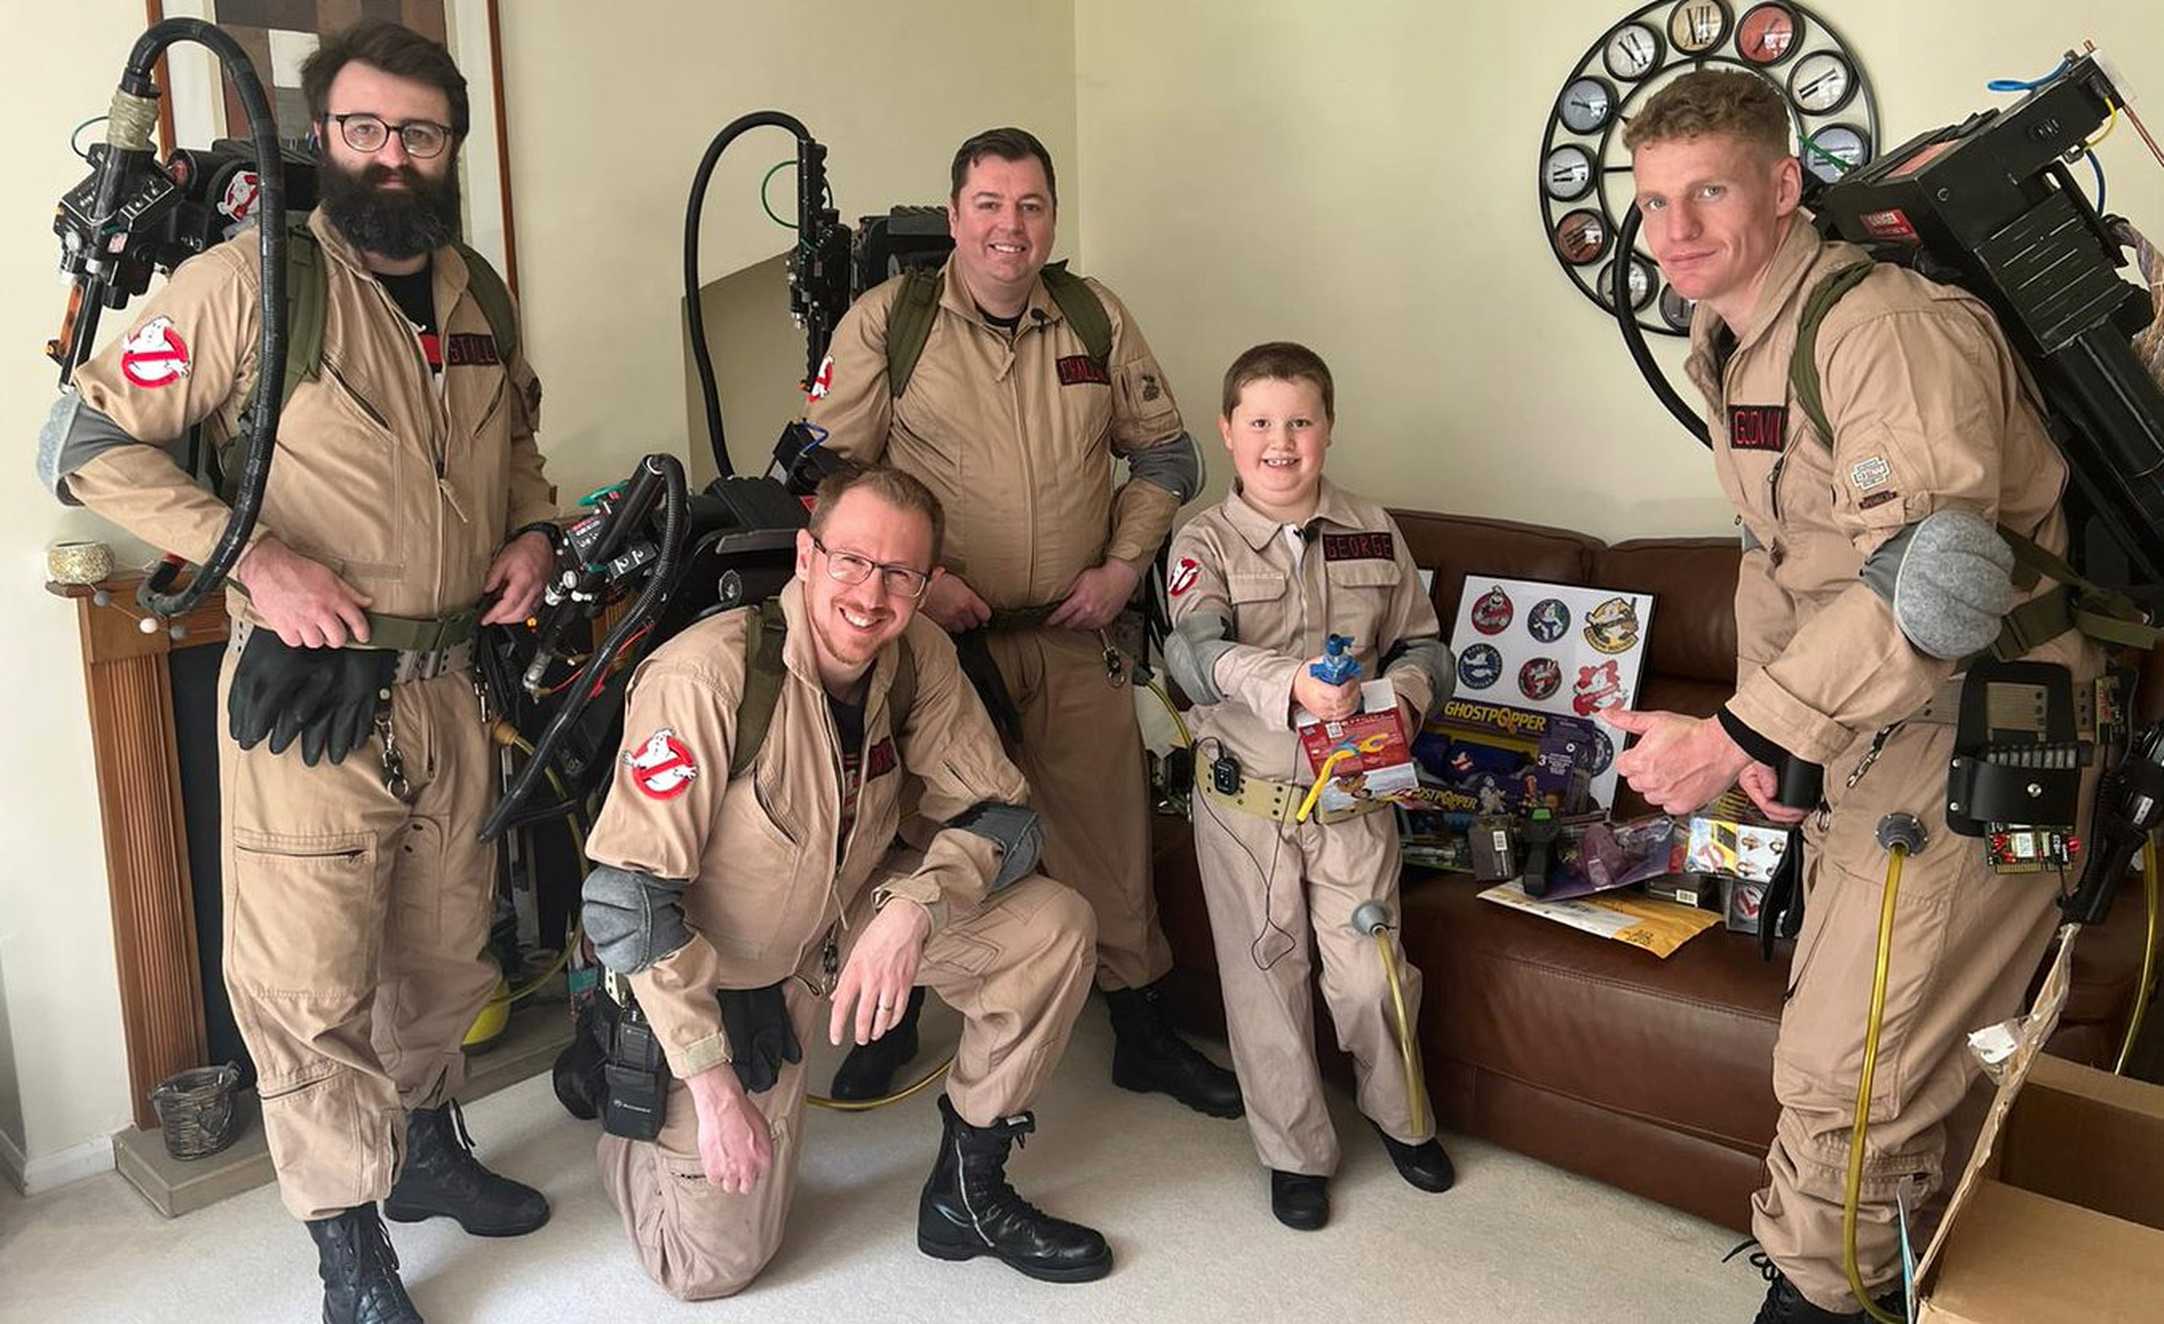 George with his fellow Ghostbusters posing in his front room.